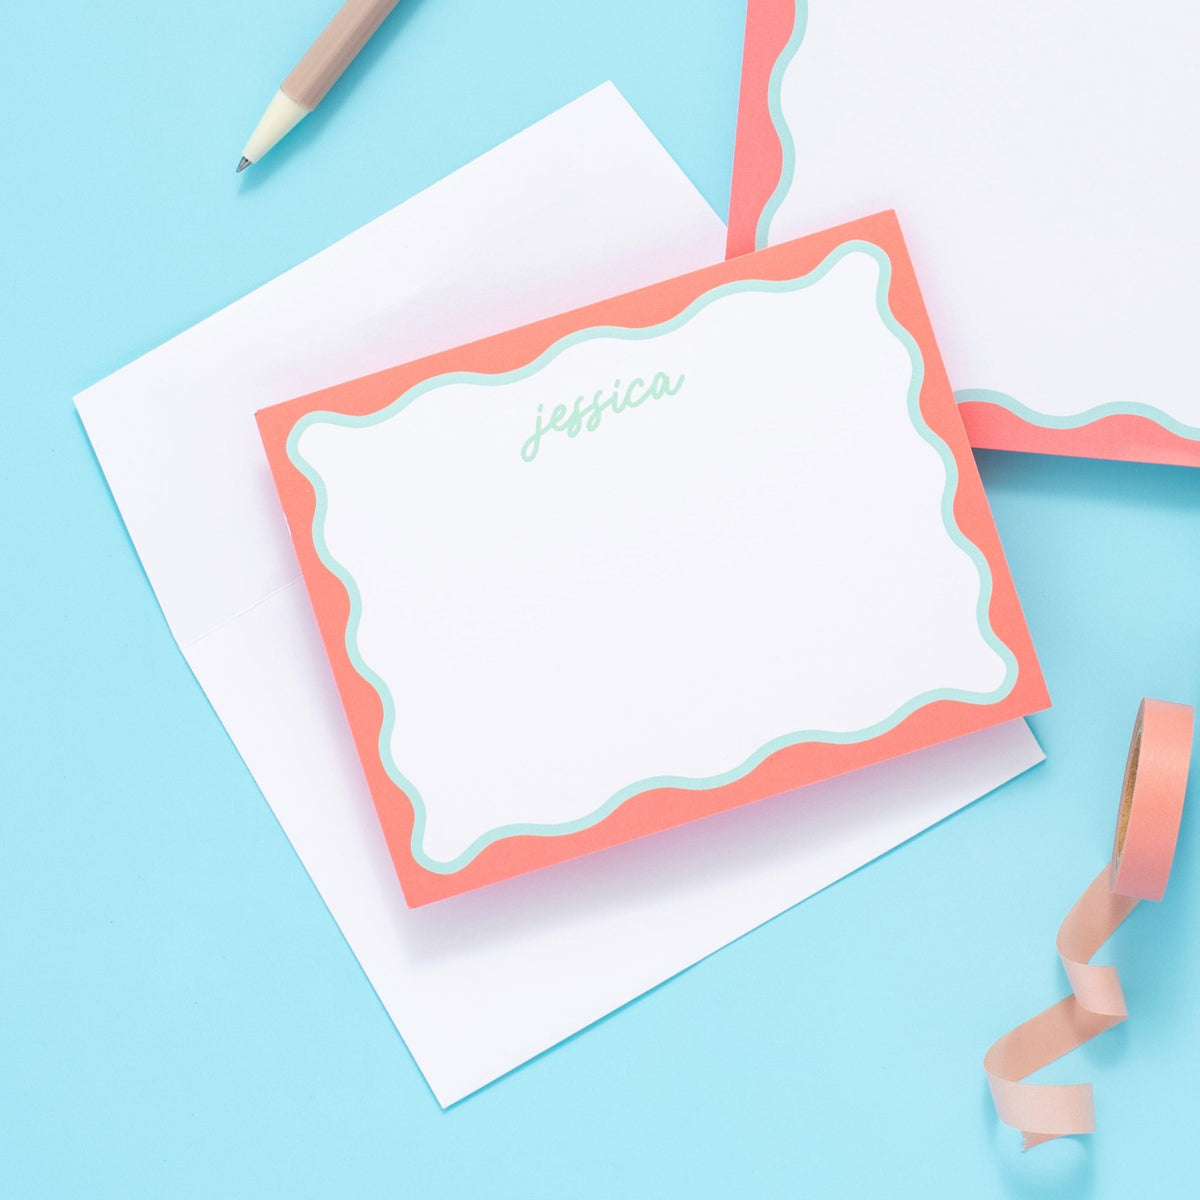 Wavy Collection Personalized Stationery